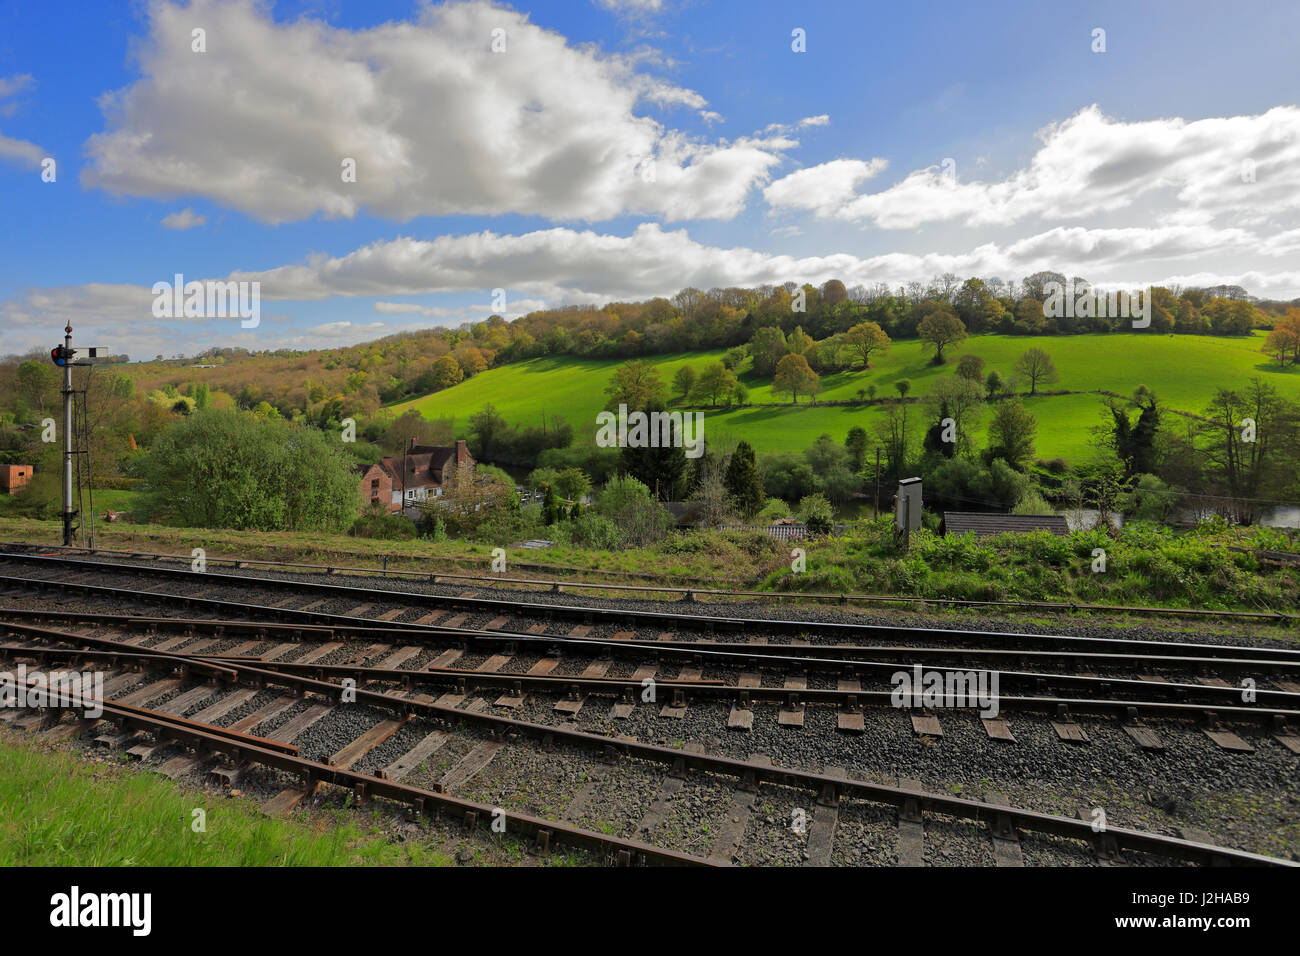 The Severn Valley from Highley Railway Station on the Severn Valley Railway, Highley near Bridgnorth, Shropshire, England, UK. Stock Photo